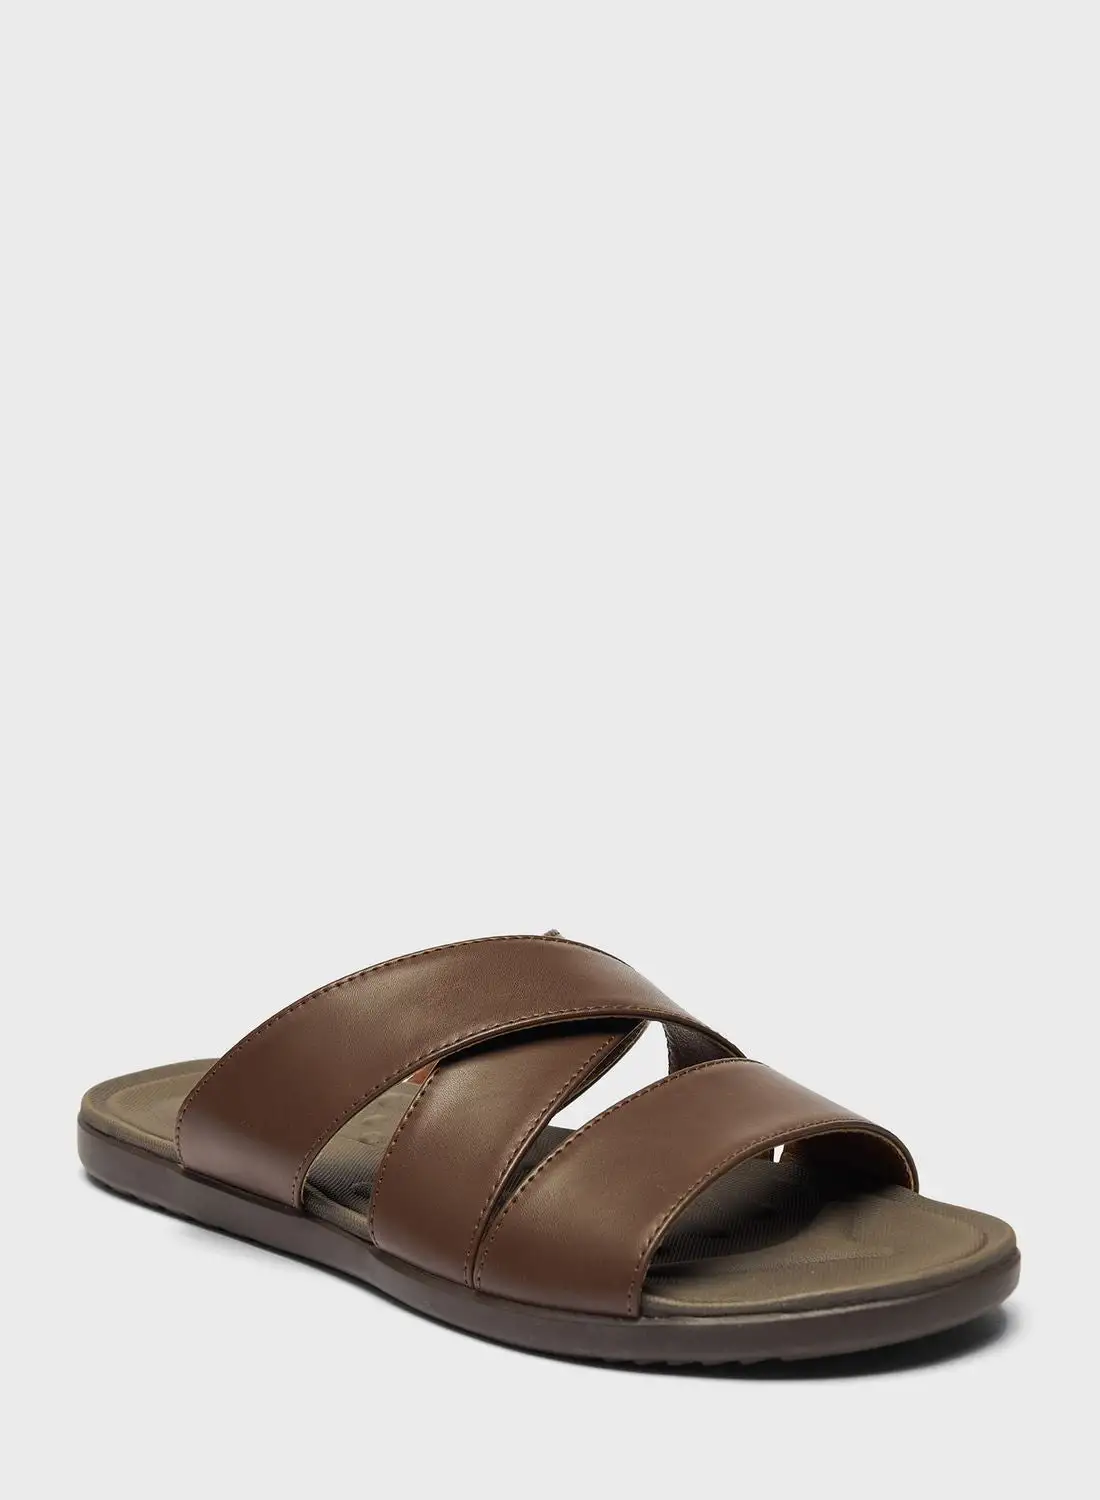 LBL by Shoexpress Cross Strap Casual Sandals